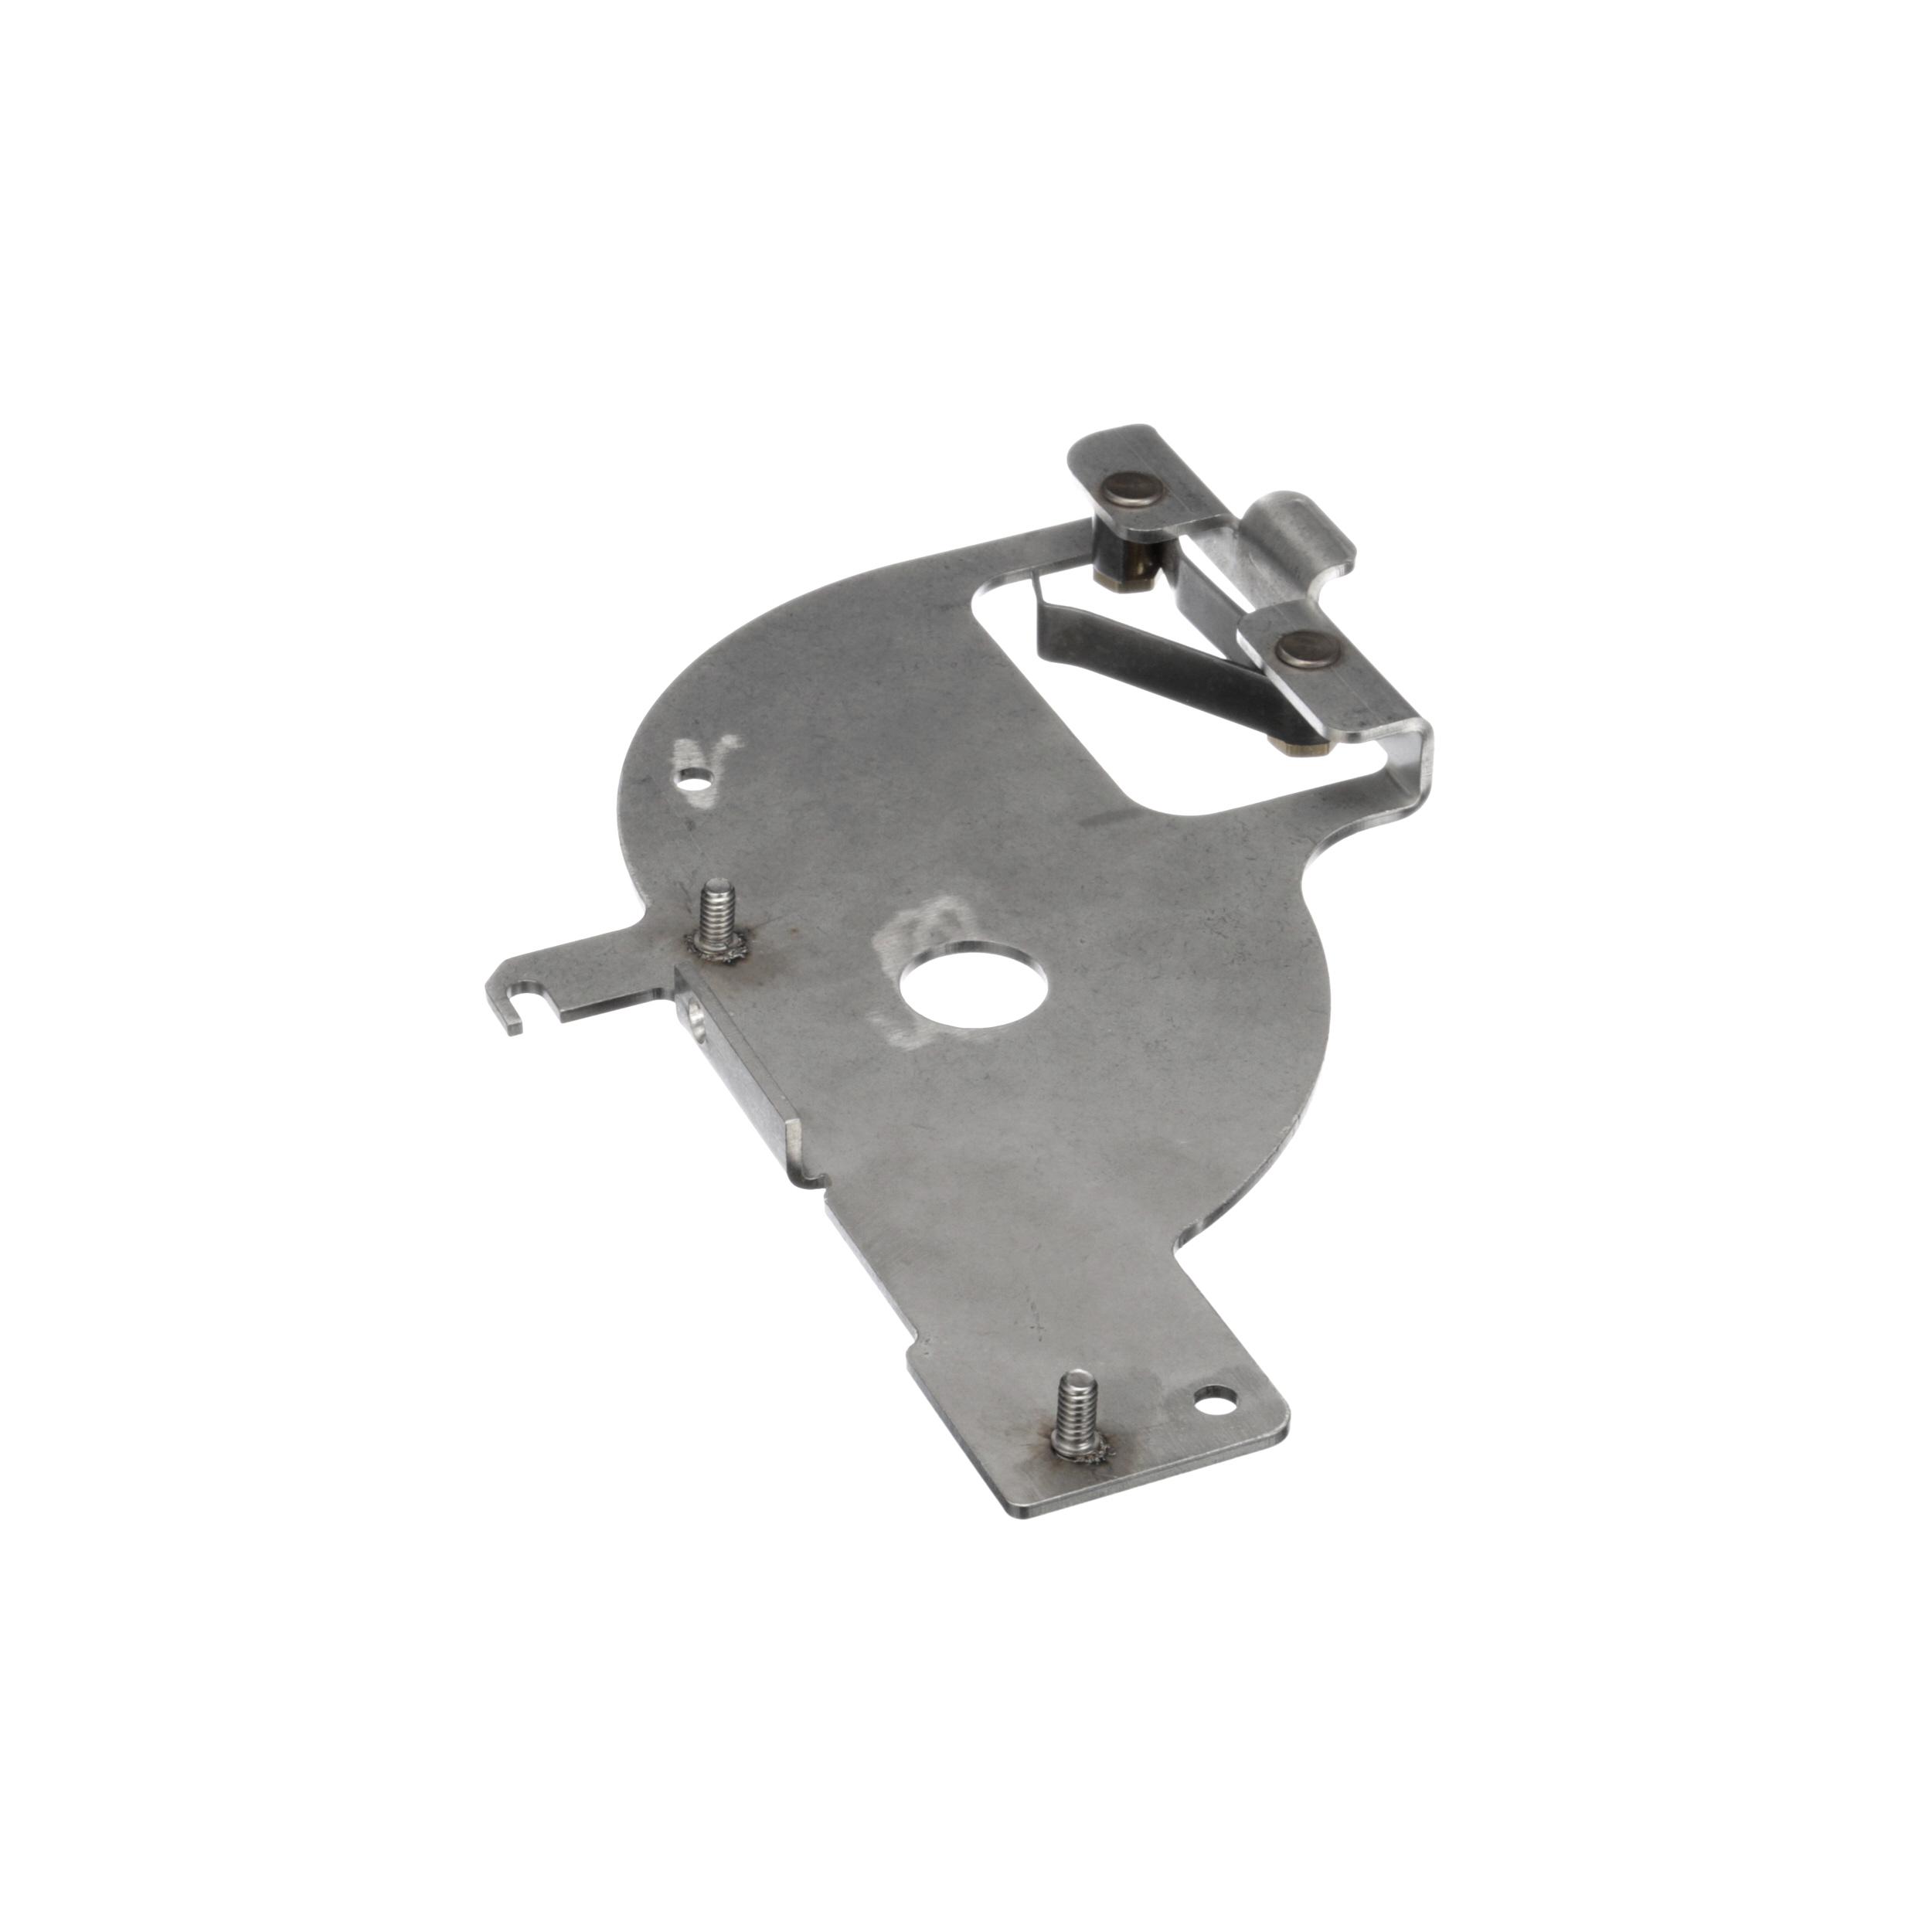 JACKSON HINGE STOP ASSEMBLY, RIGHT | Part #5700-003-32-61